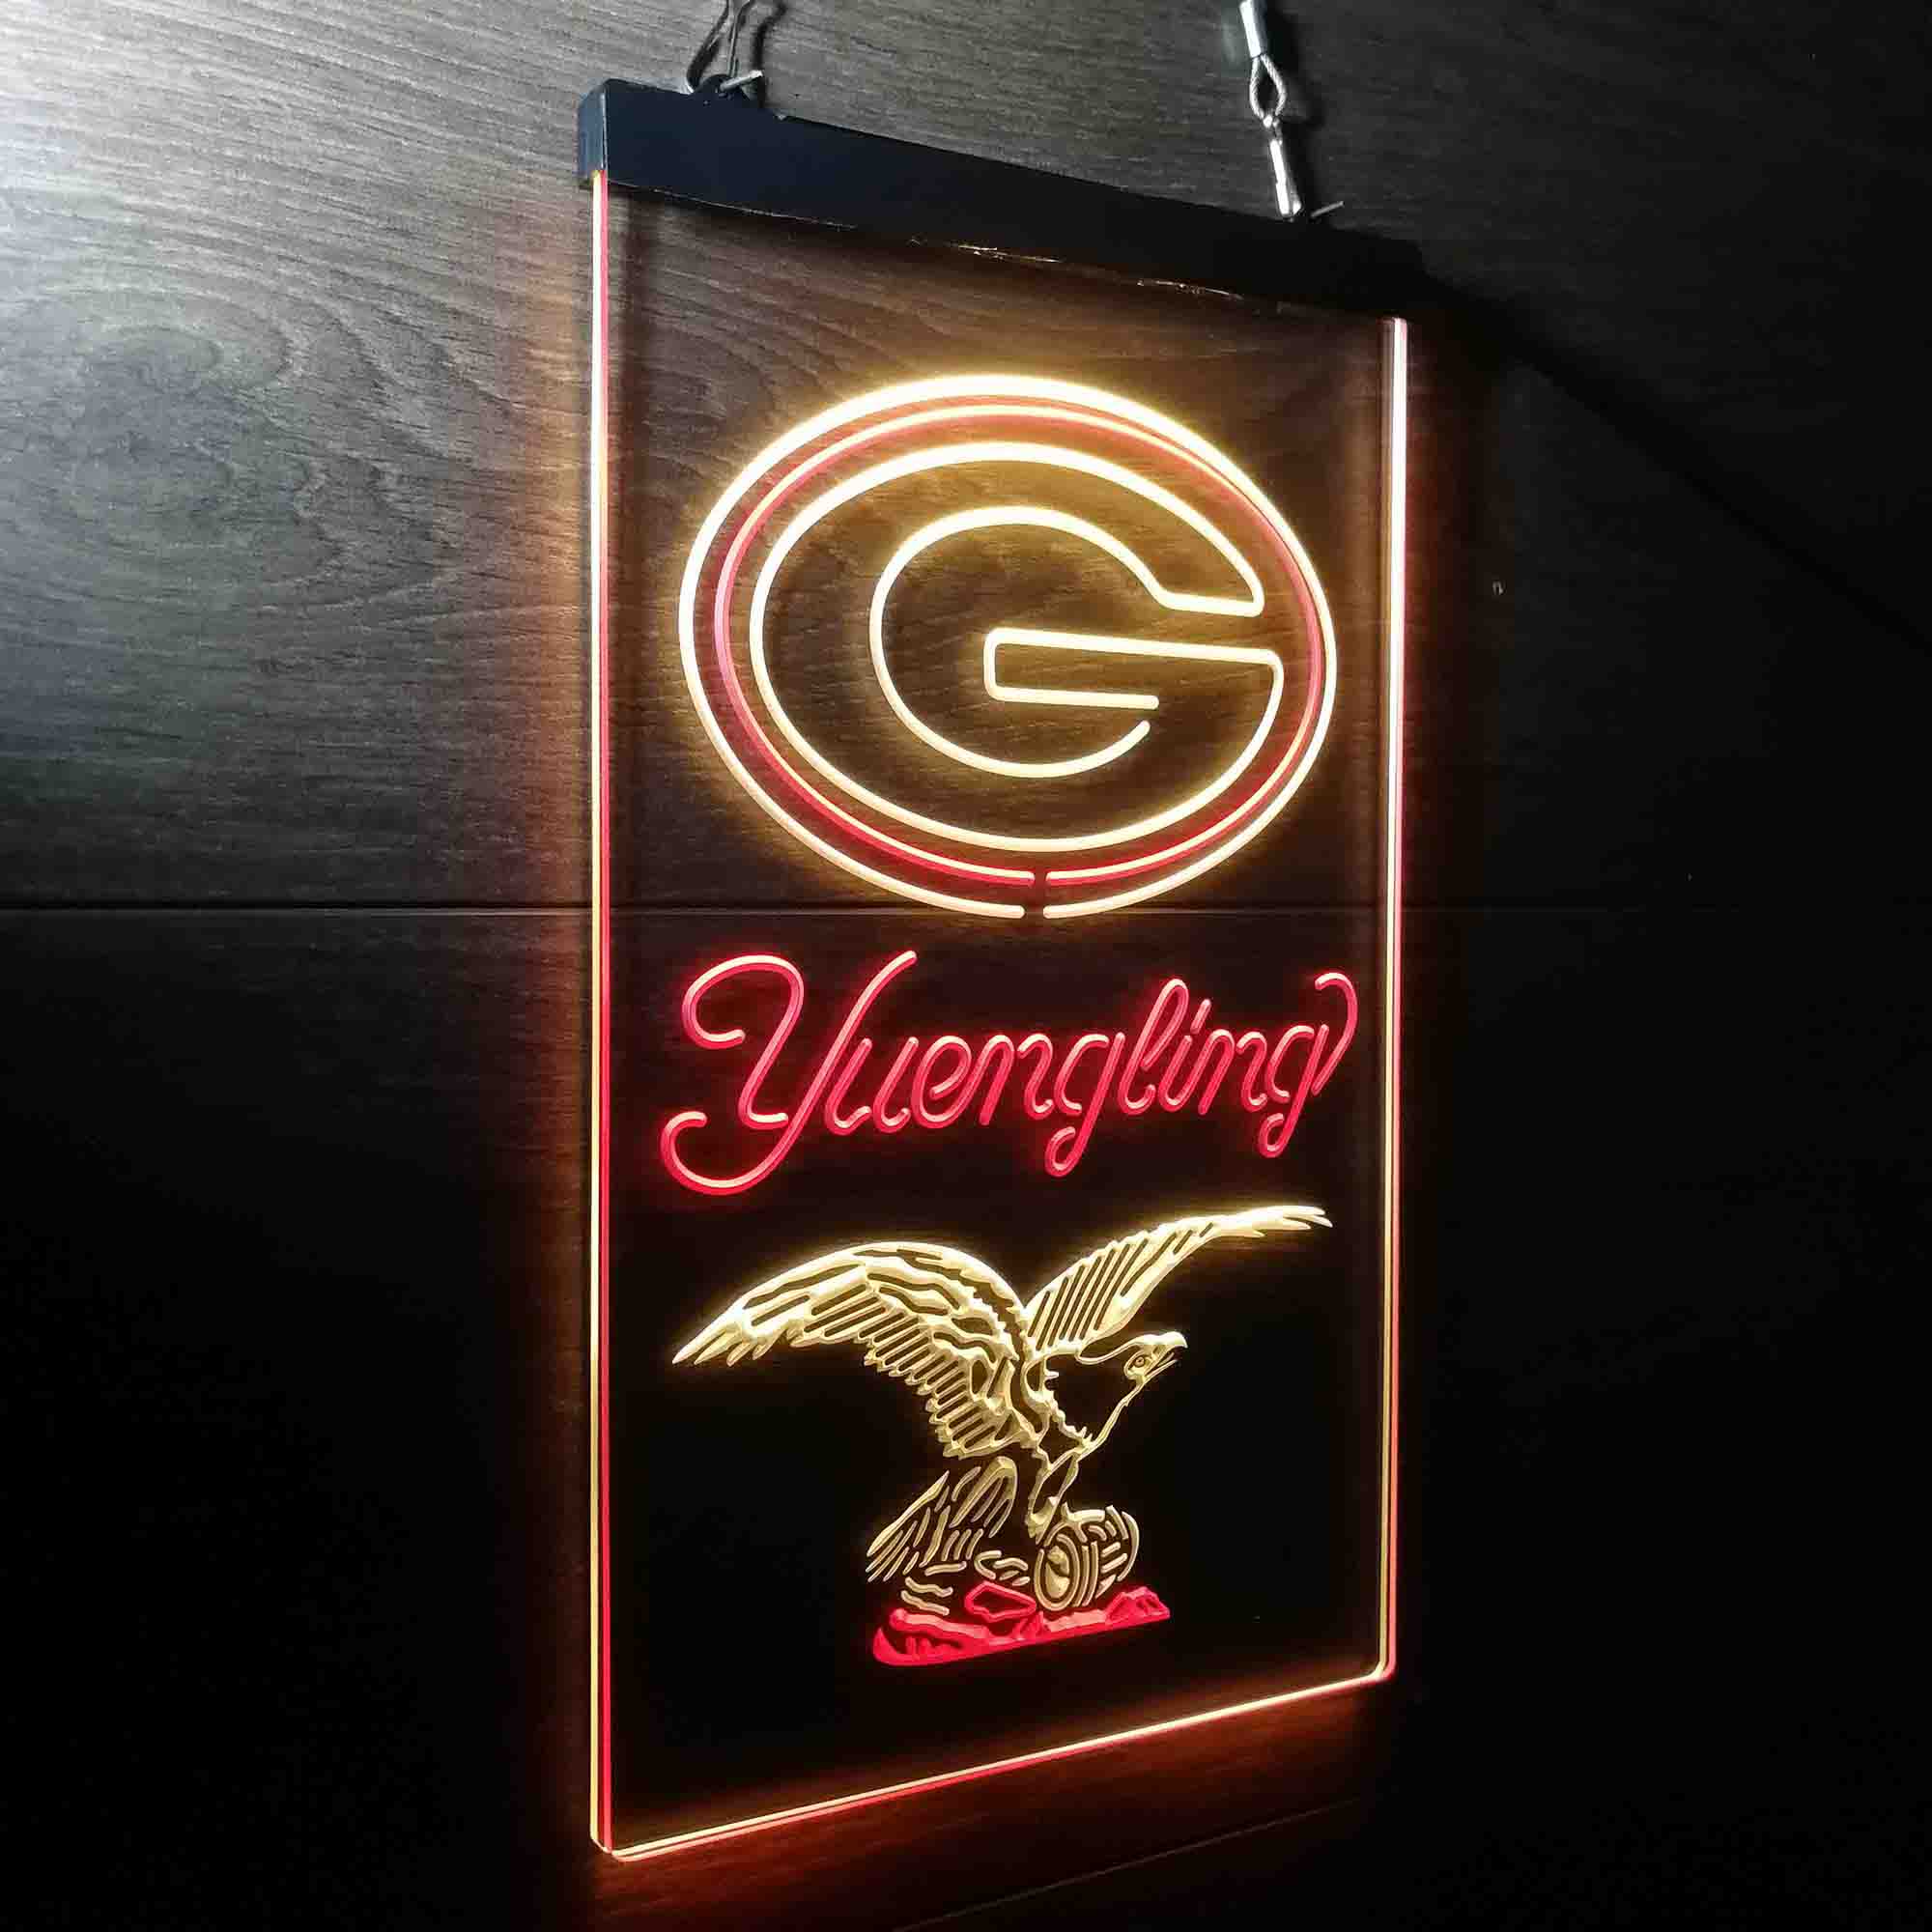 Yuengling Bar Green Bay Packers Est. 1919 Neon-Like LED Sign